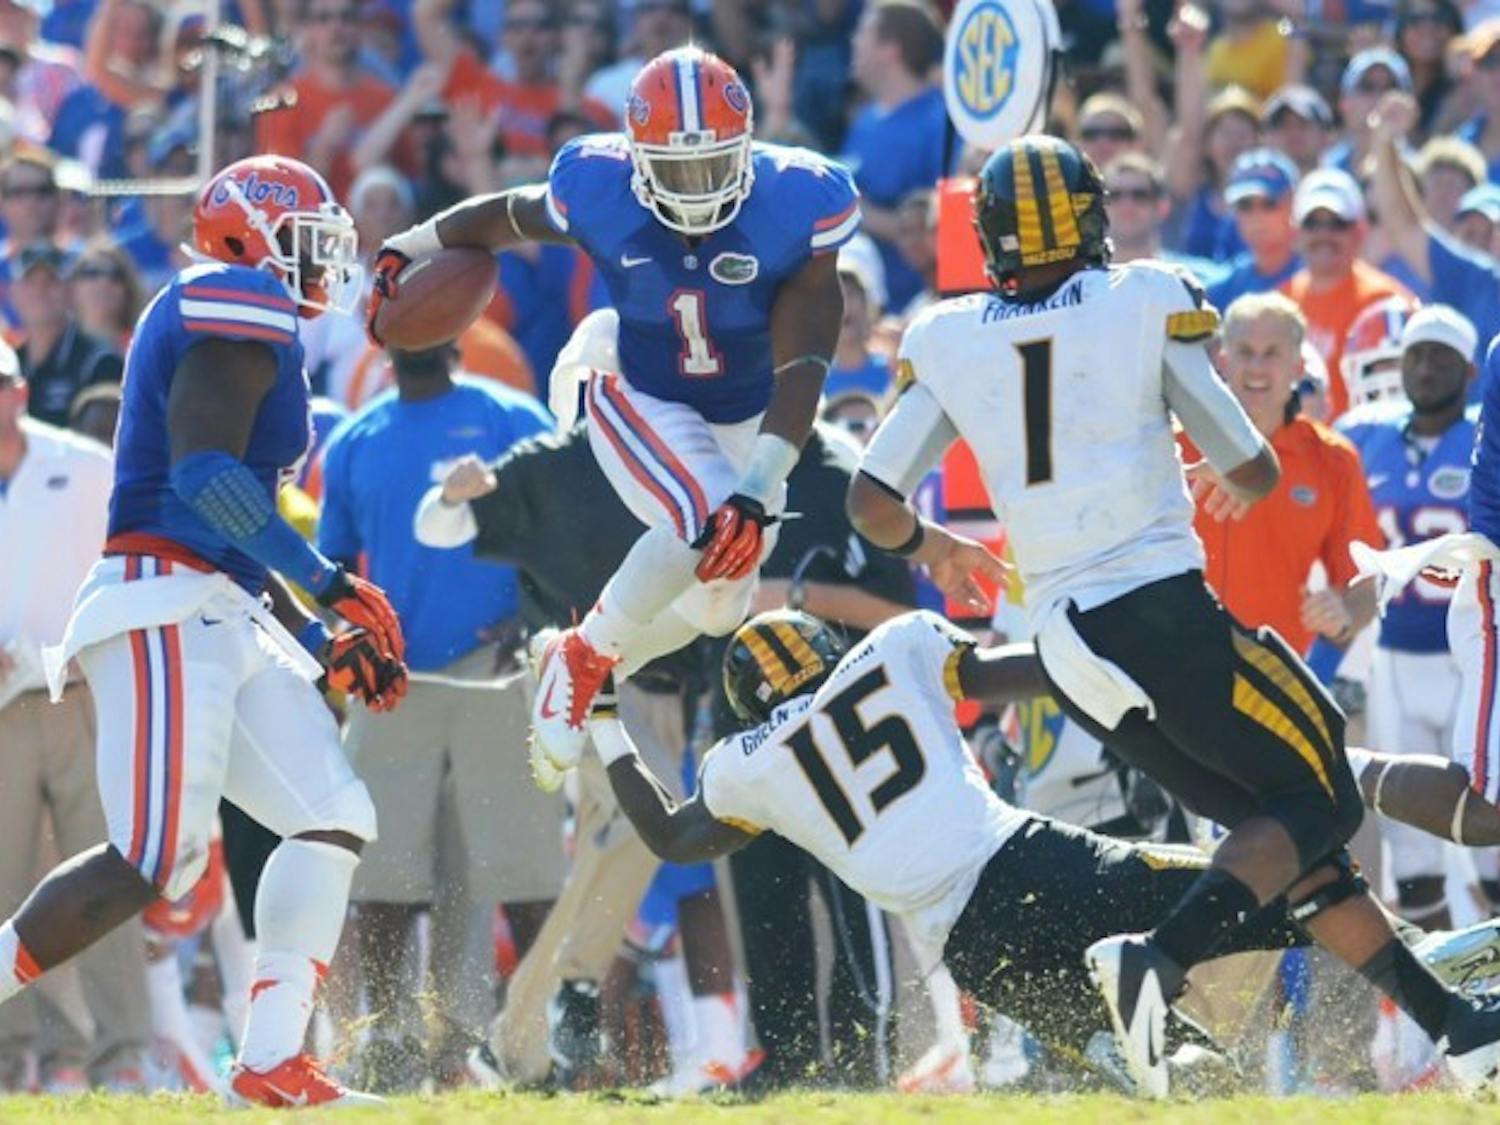 Linebacker Jon Bostic (1) attempts to hurdle Missouri wideout Dorial Green-Beckham (15) after making an interception during the fourth quarter of Florida’s 14-7 win on Saturday at Ben Hill Griffin Stadium.